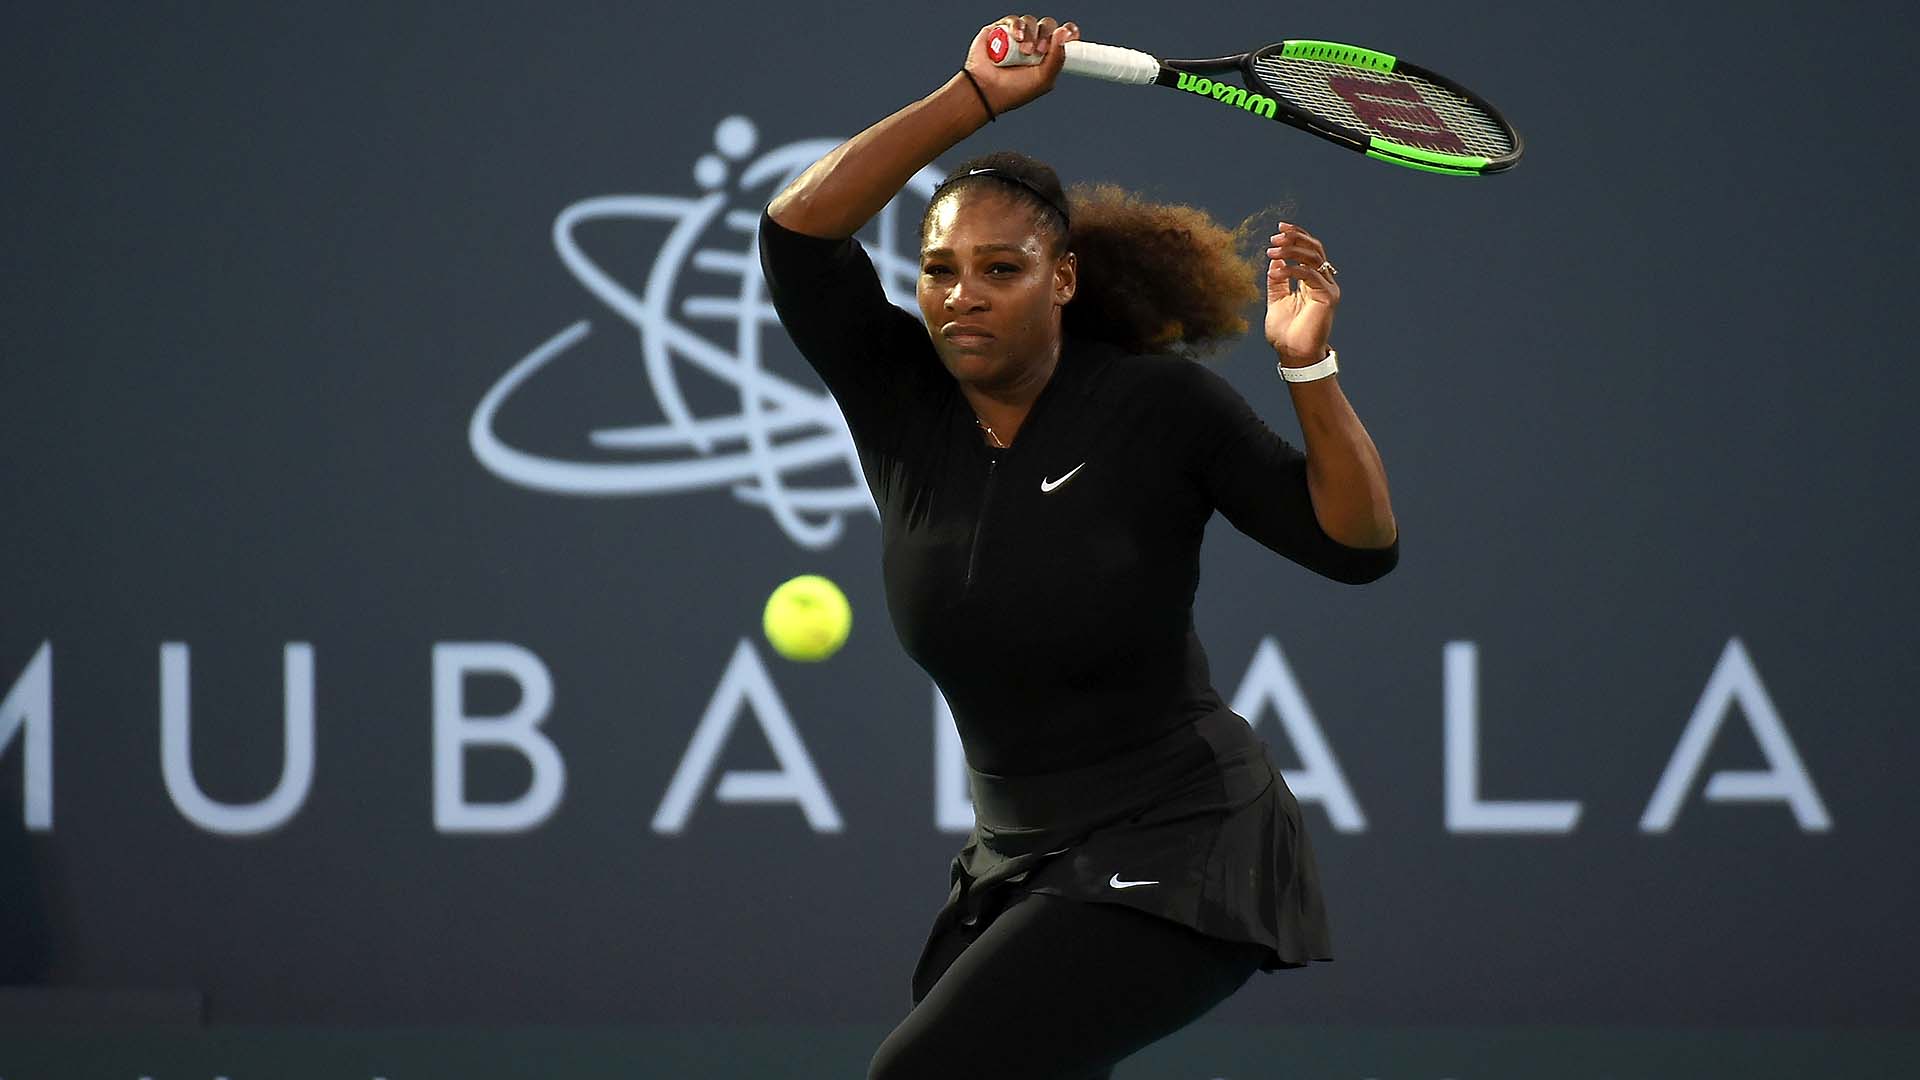 ABU DHABI, UNITED ARAB EMIRATES - DECEMBER 30: Serena Williams of United States plays a forehand during her Ladies Final match against Jelena Ostapenko of Latvia on day three of the Mubadala World Tennis Championship at International Tennis Centre Zayed Sports City on December 30, 2017 in Abu Dhabi, United Arab Emirates. (Photo by Tom Dulat/Getty Images)